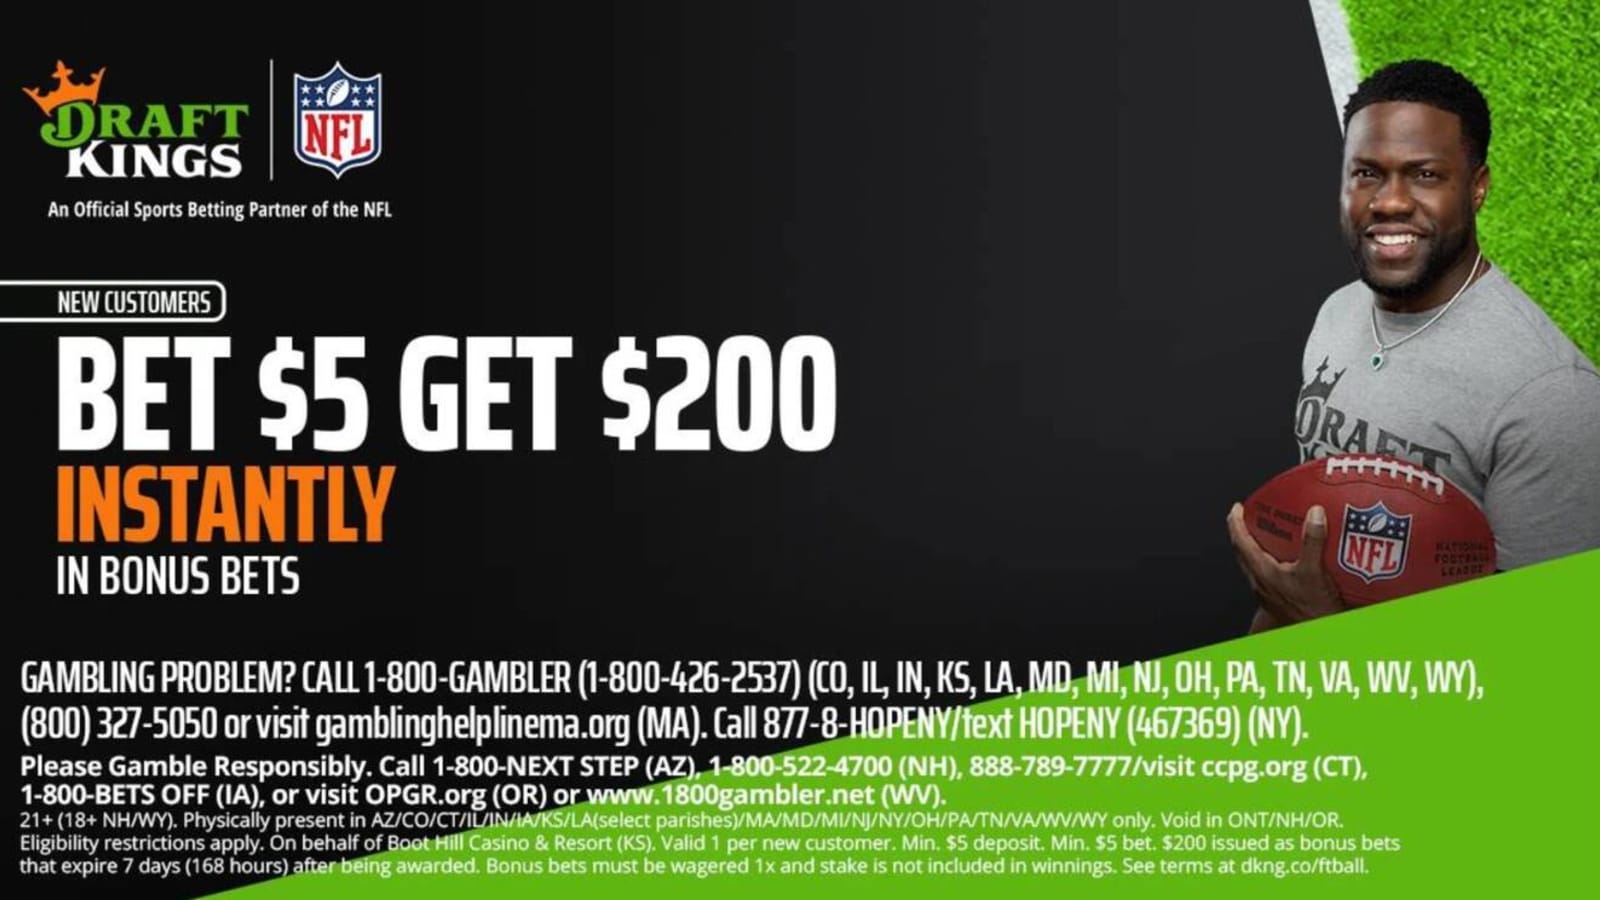 Claim a $200 Instant Bonus When You Bet on NFL Week 10 With DraftKings